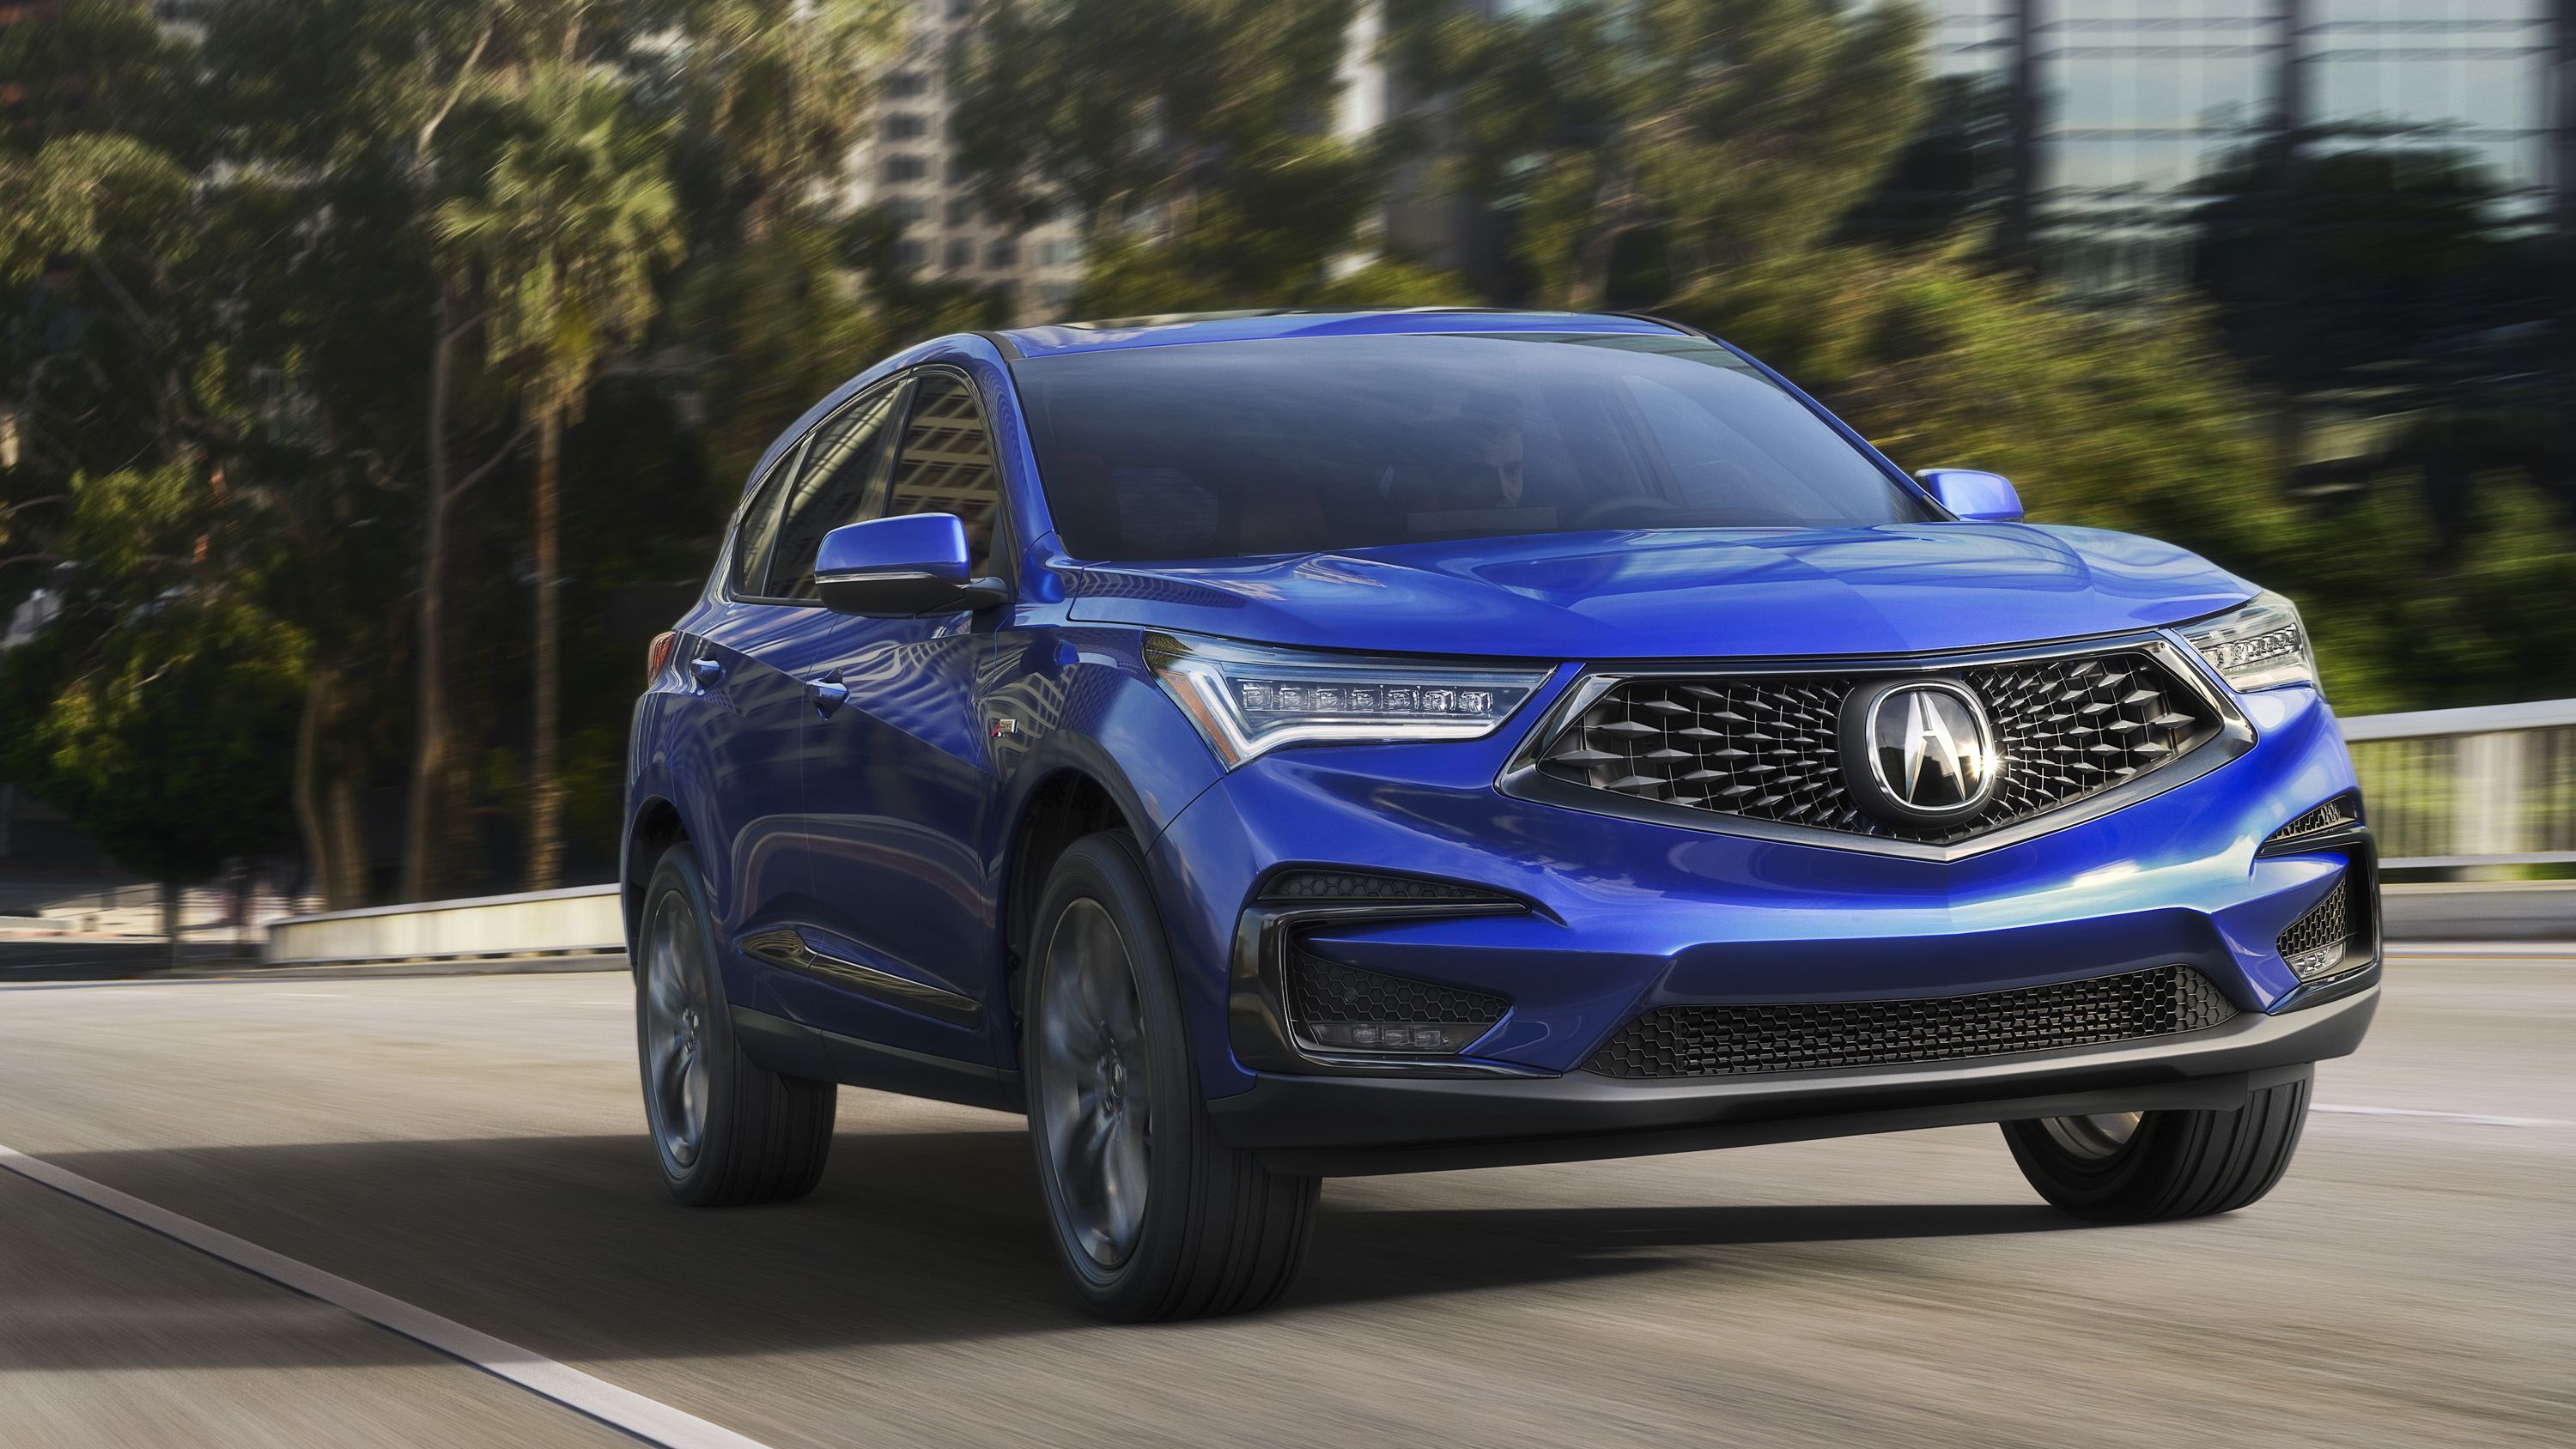 2019 For $695 Hondata Will Give your 2019 Acura RDX the Mid-Range Torque it Deserves